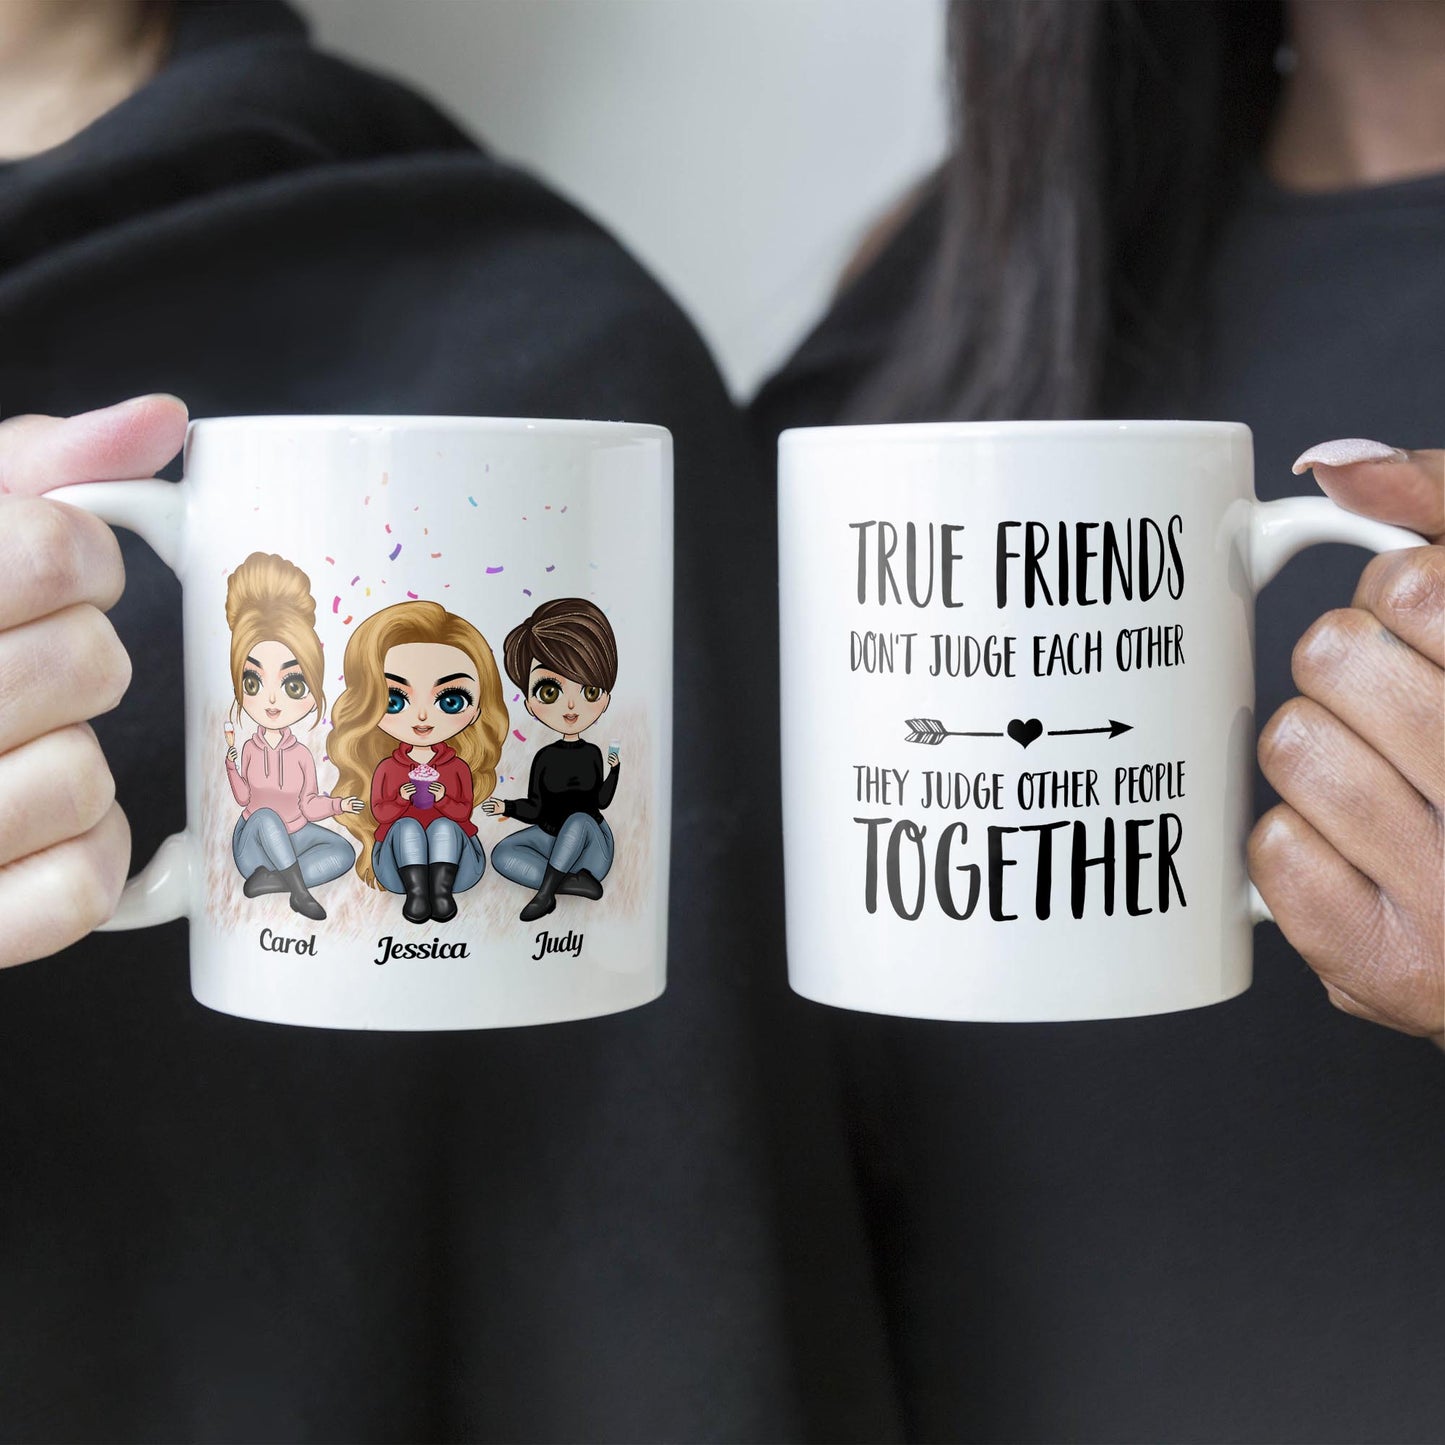 True Friends Don't Judge Each Other - Personalized Mug - Birthday & Christmas Gift For Bestie, Best Friend, BFF